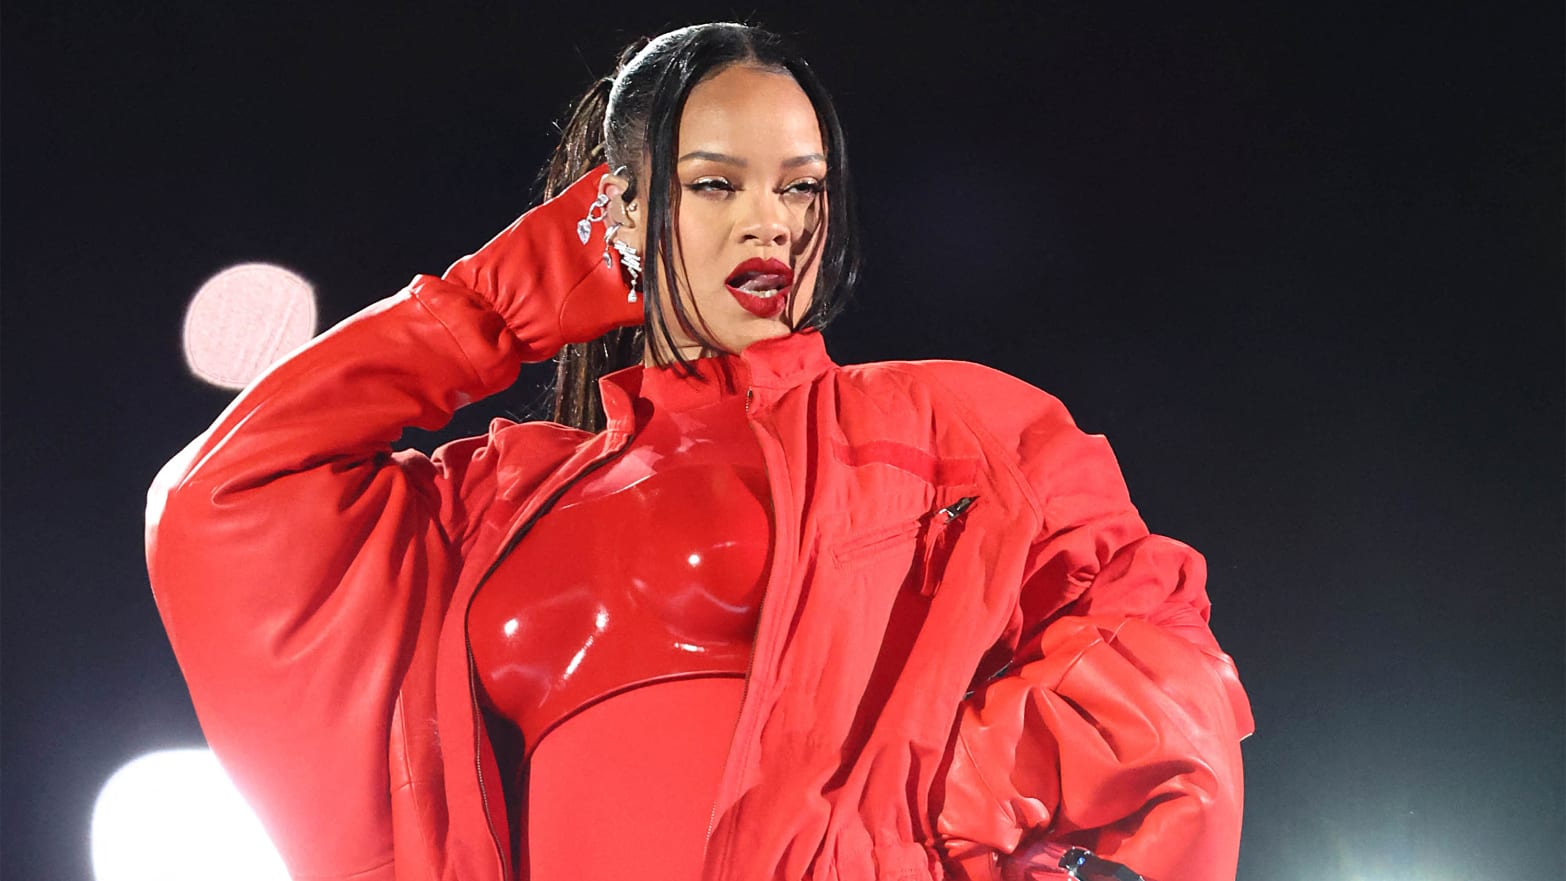 Pregnant Rihanna’s Super Bowl Halftime Show Review An Icon at the Top